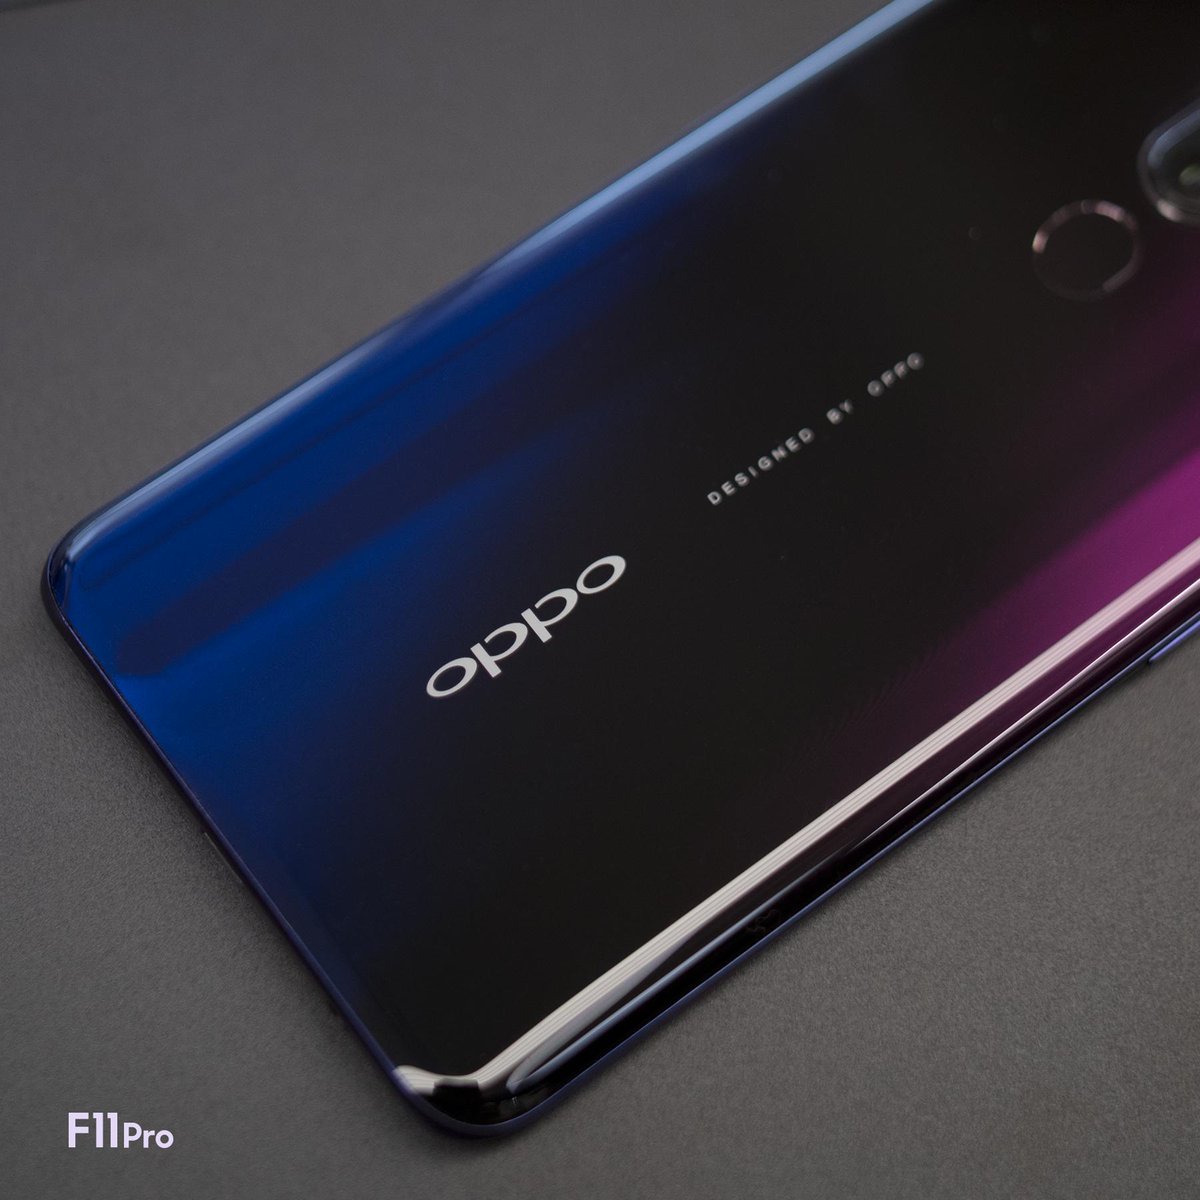 The OPPO F11 Pro makes an appearance in hands-on video